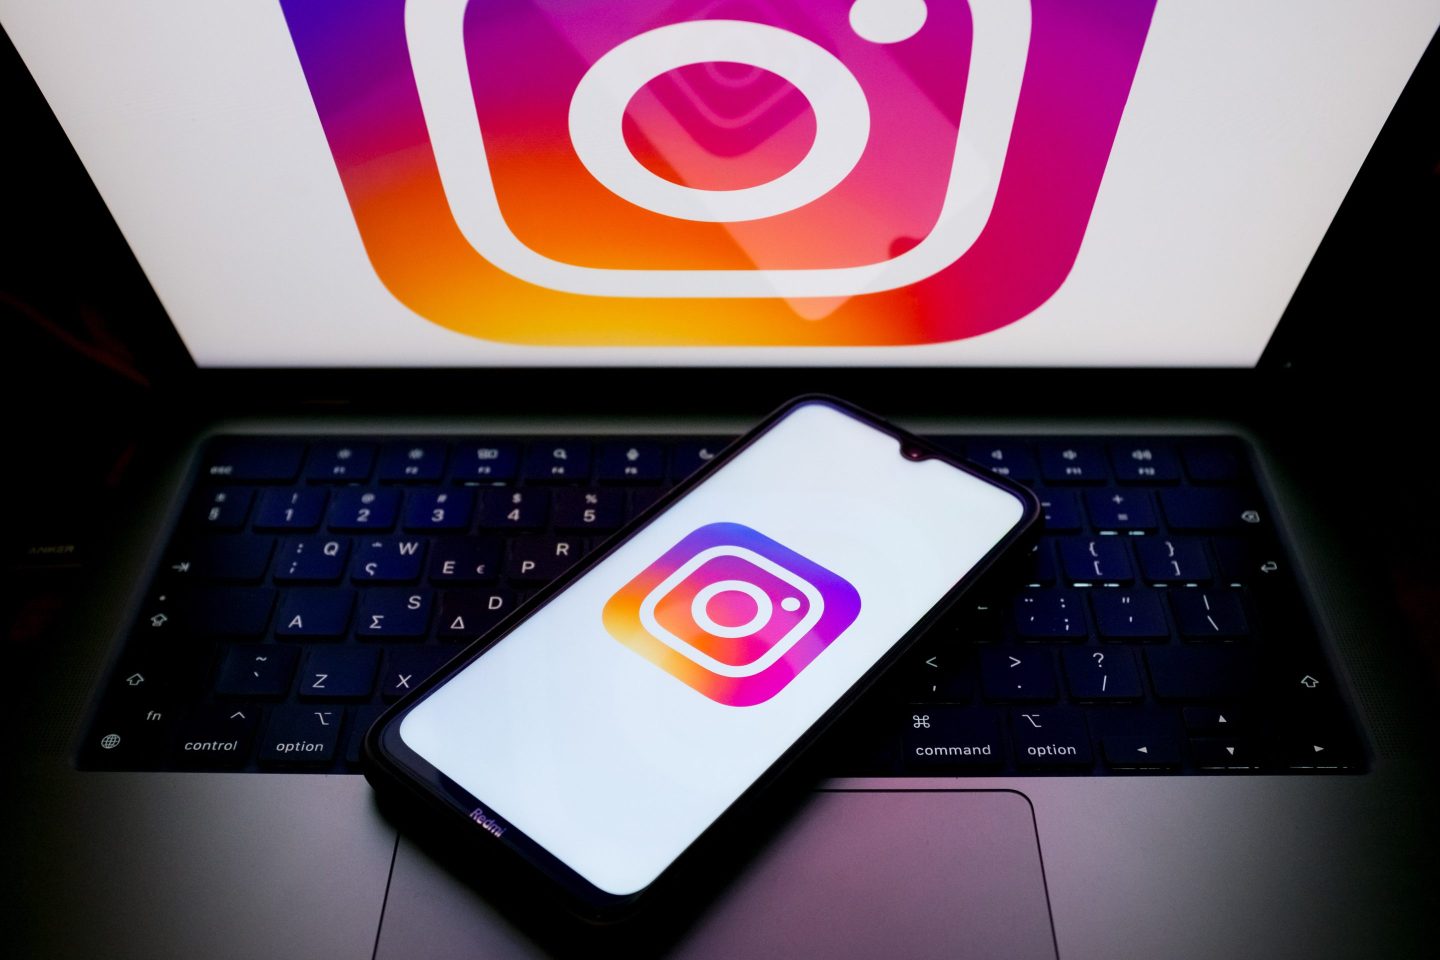 Some Instagram users have found an unwanted feature creeping up in their timeline.